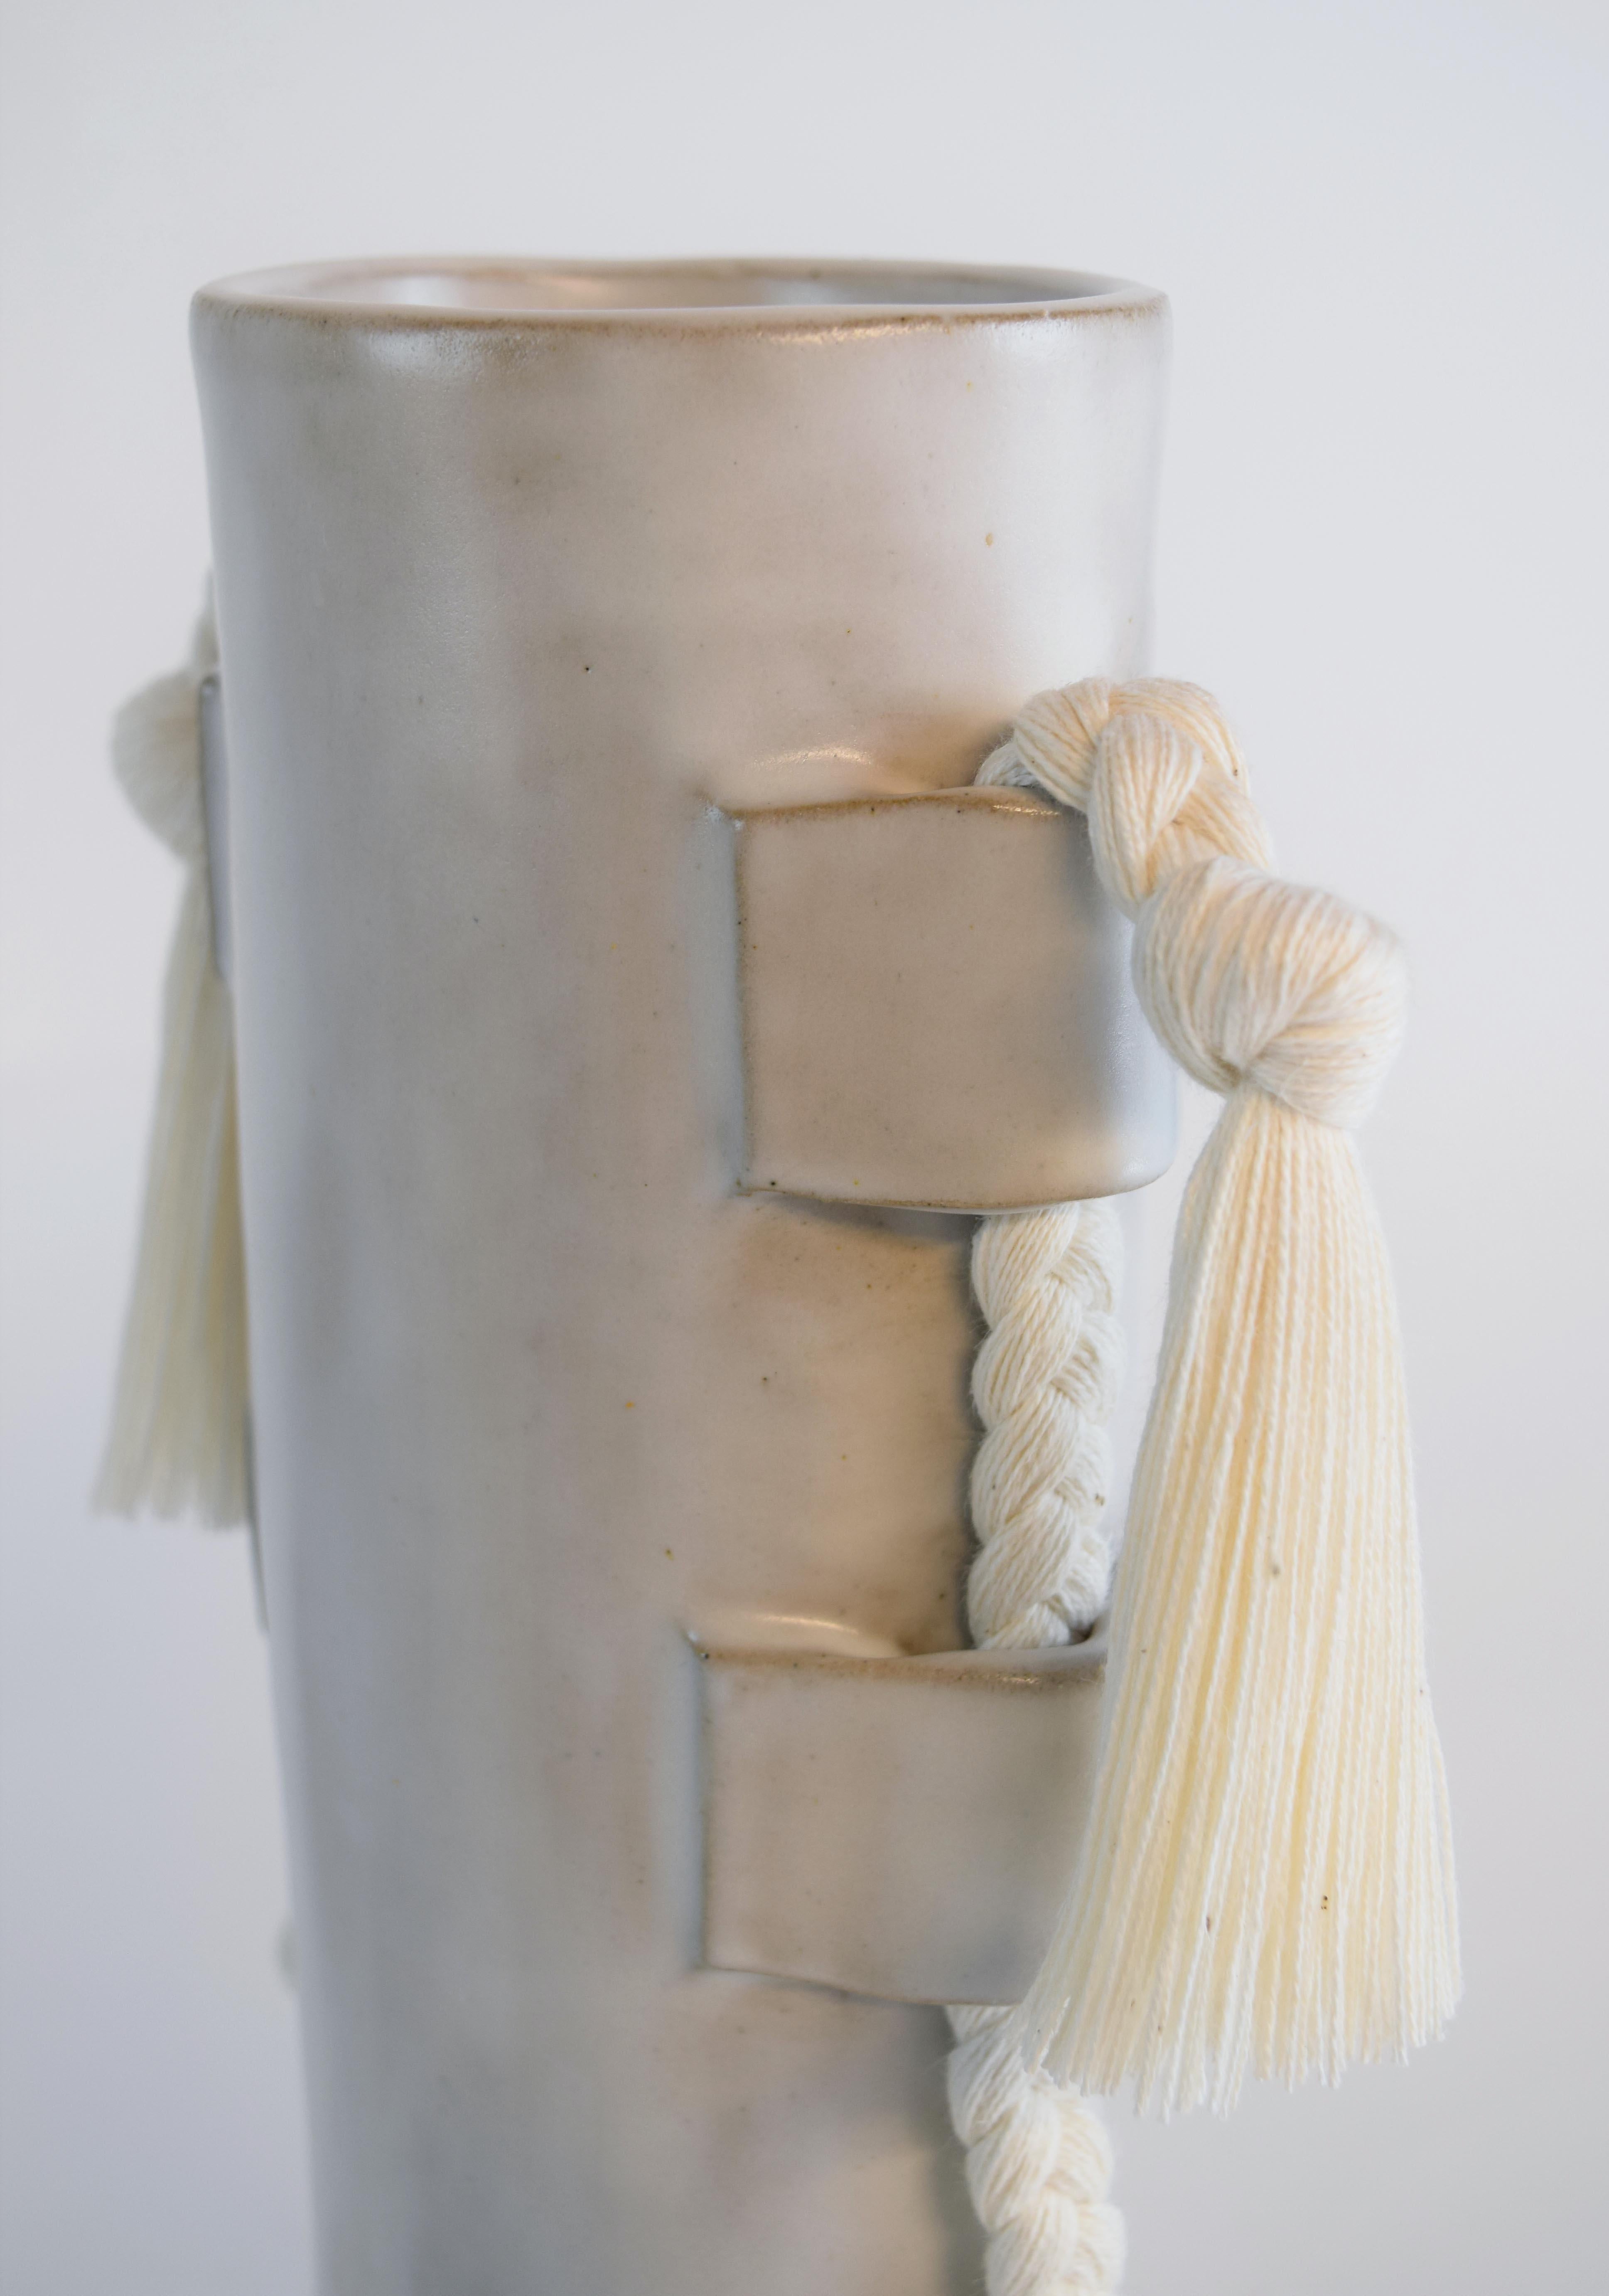 American Handmade Ceramic Vase #504 in Satin White with White Cotton Braid and Fringe For Sale